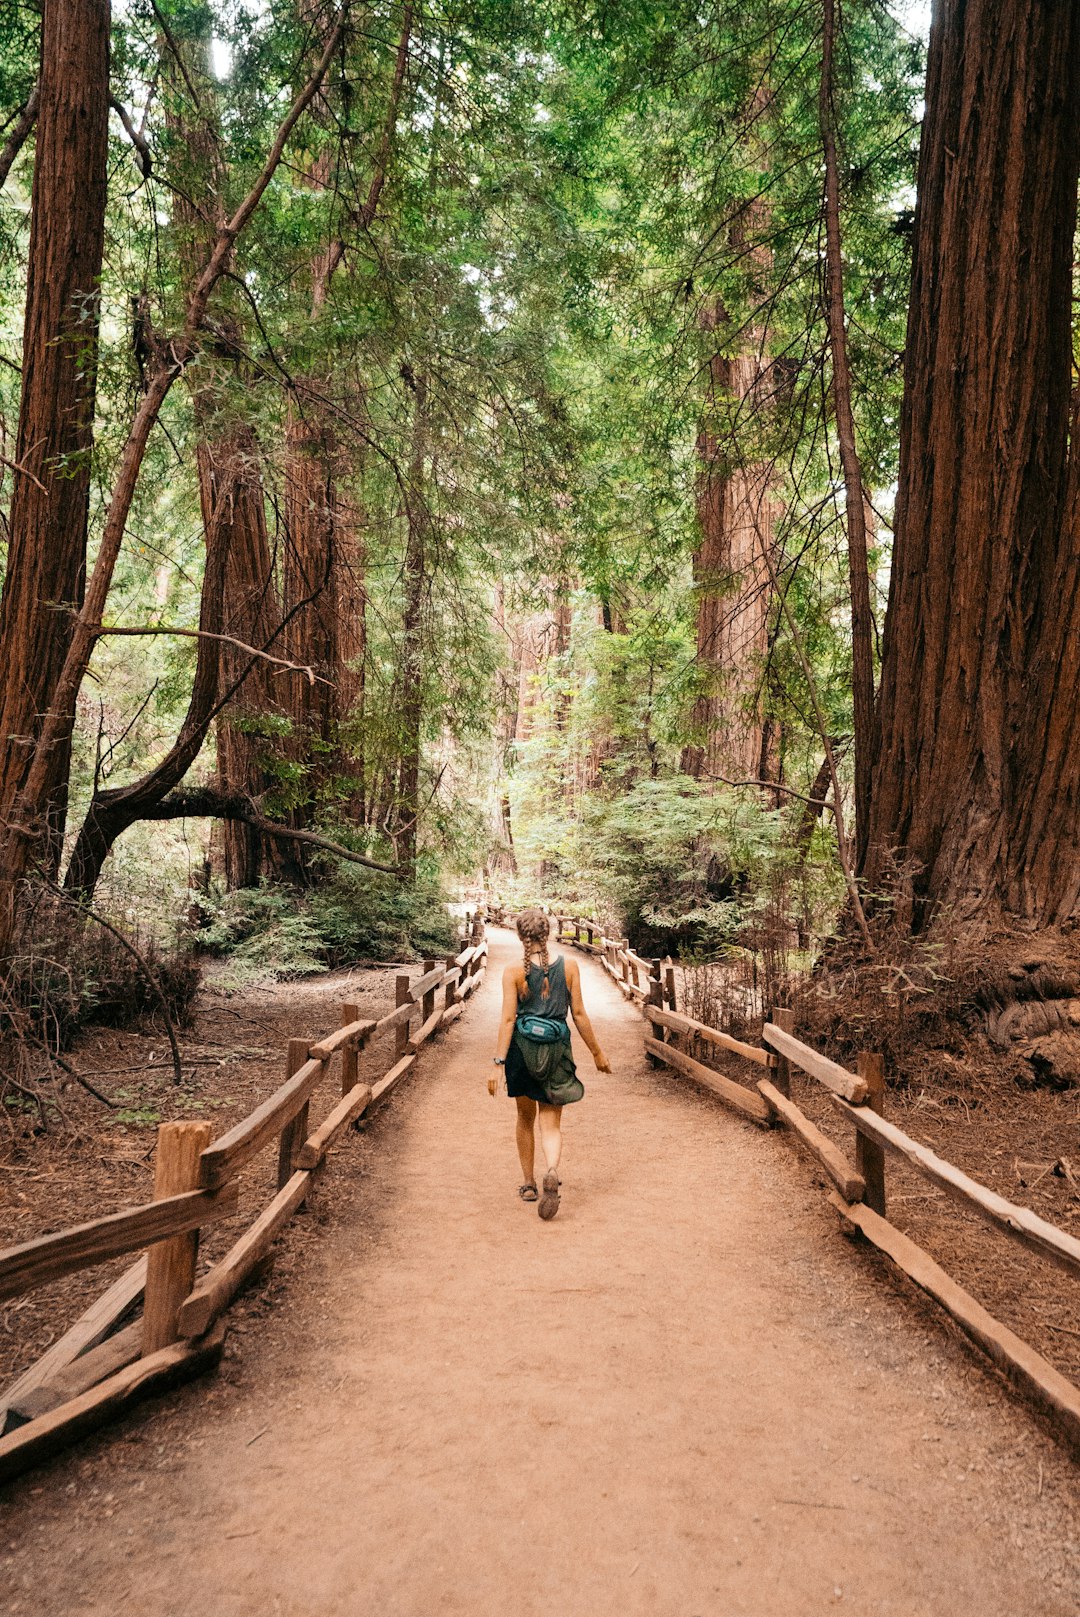 Travel Tips and Stories of Muir Woods National Monument in United States